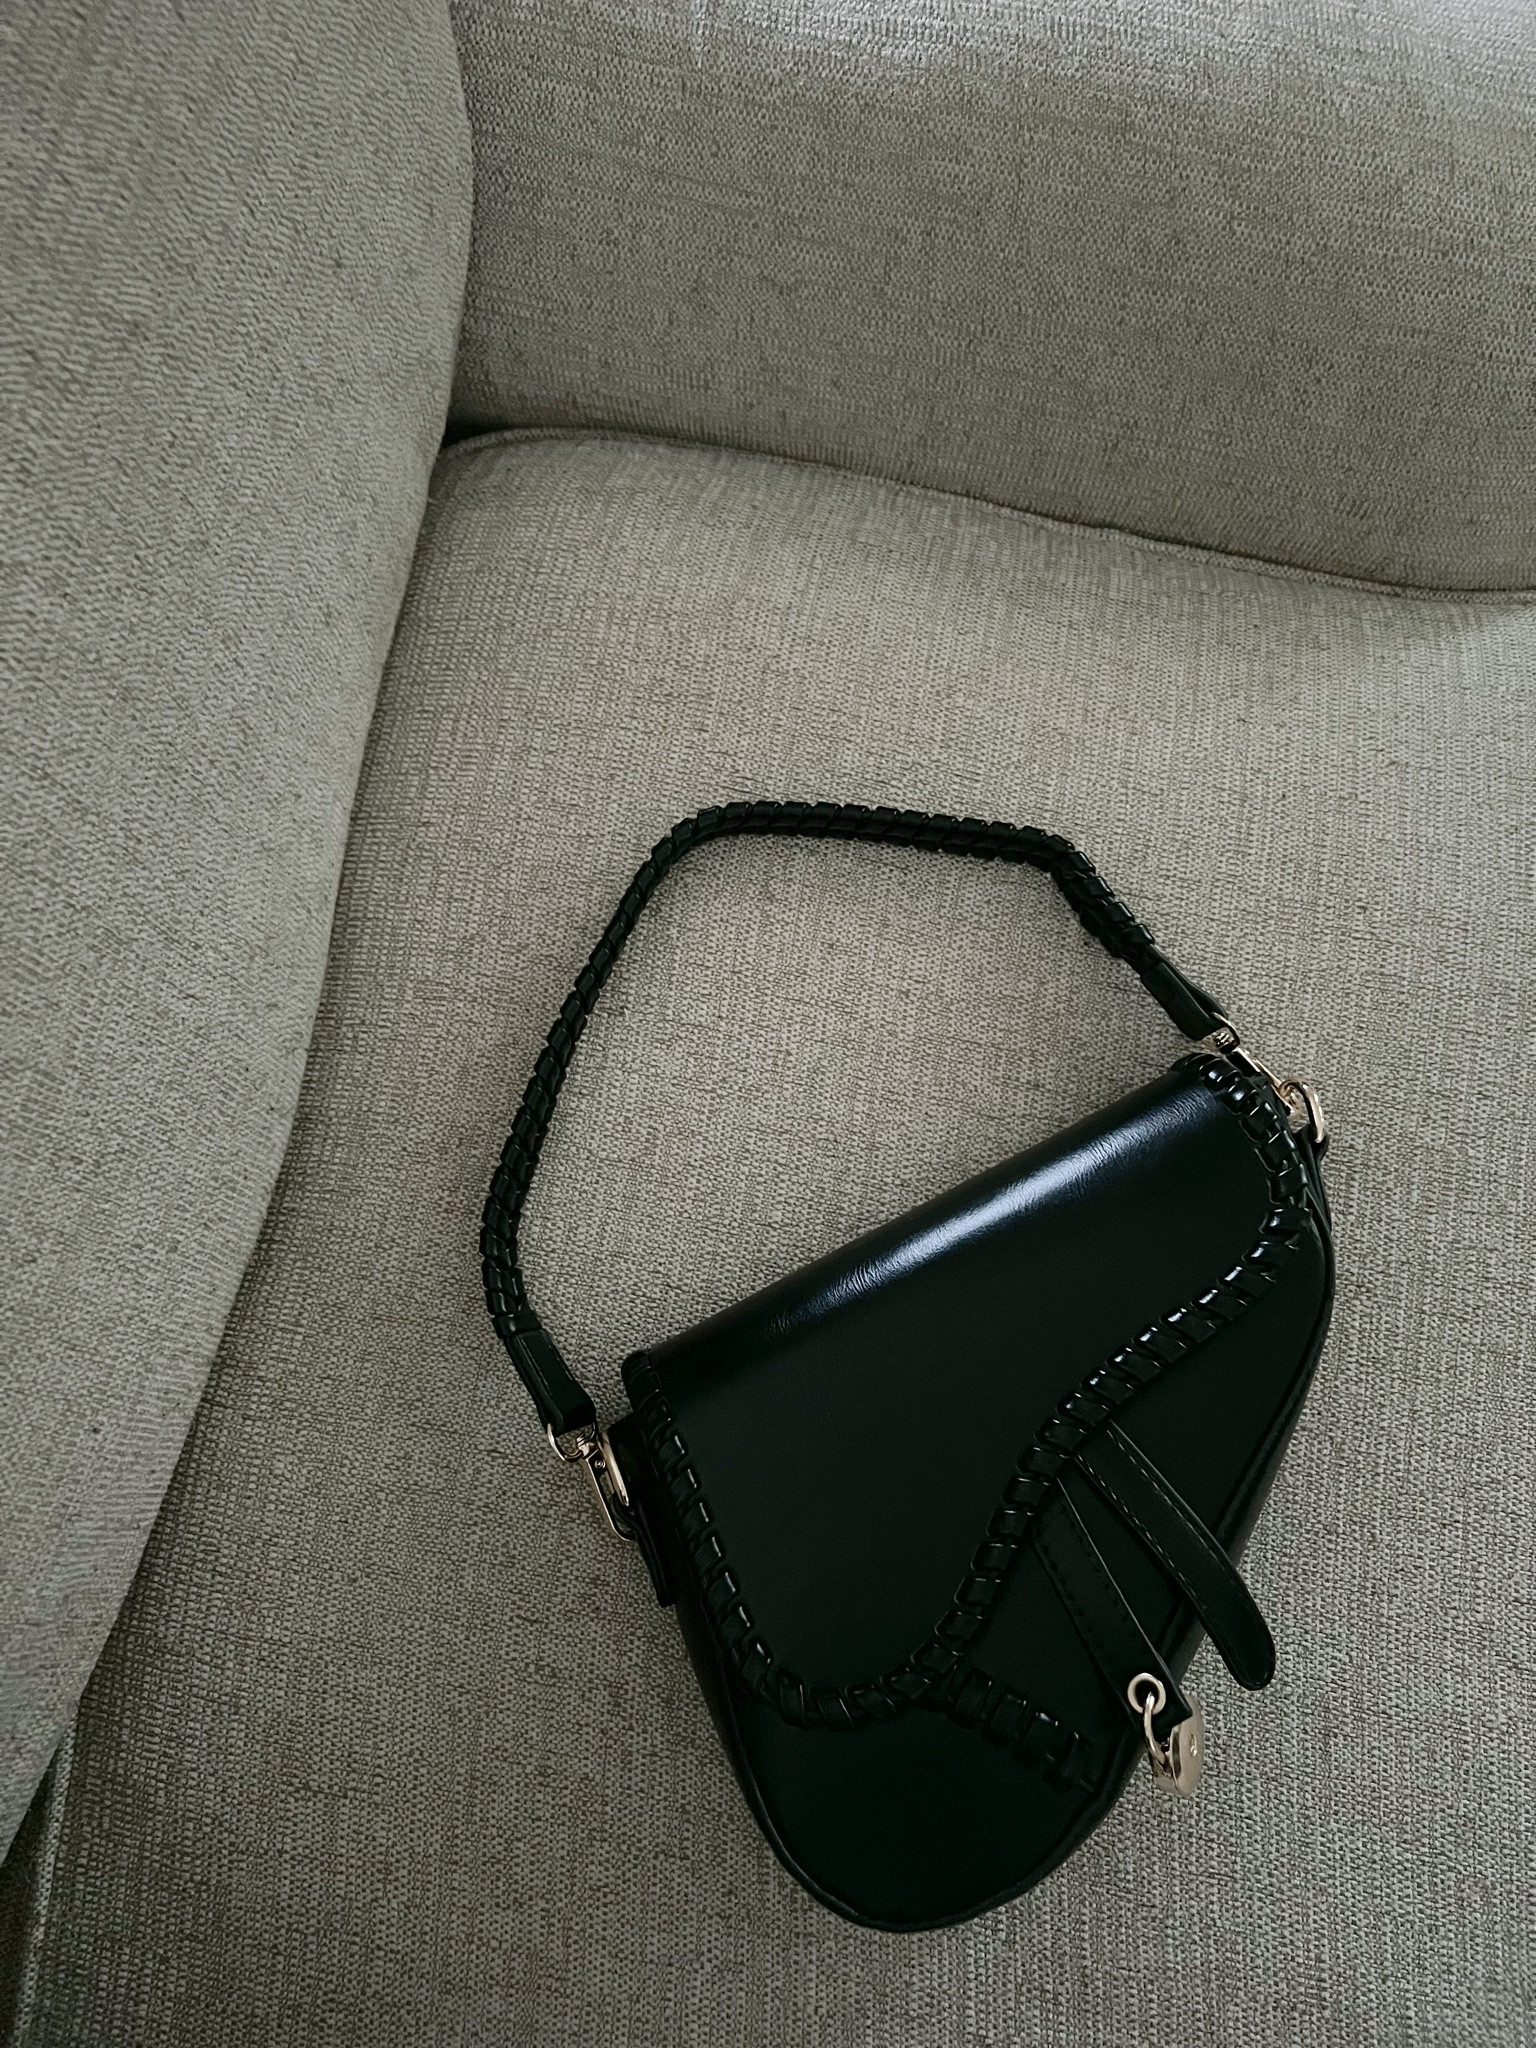 DIOR MINI SADDLE BAG, WHATS IN MY BAG + IS IT WORTH IT?, LUXURY UNBOXING